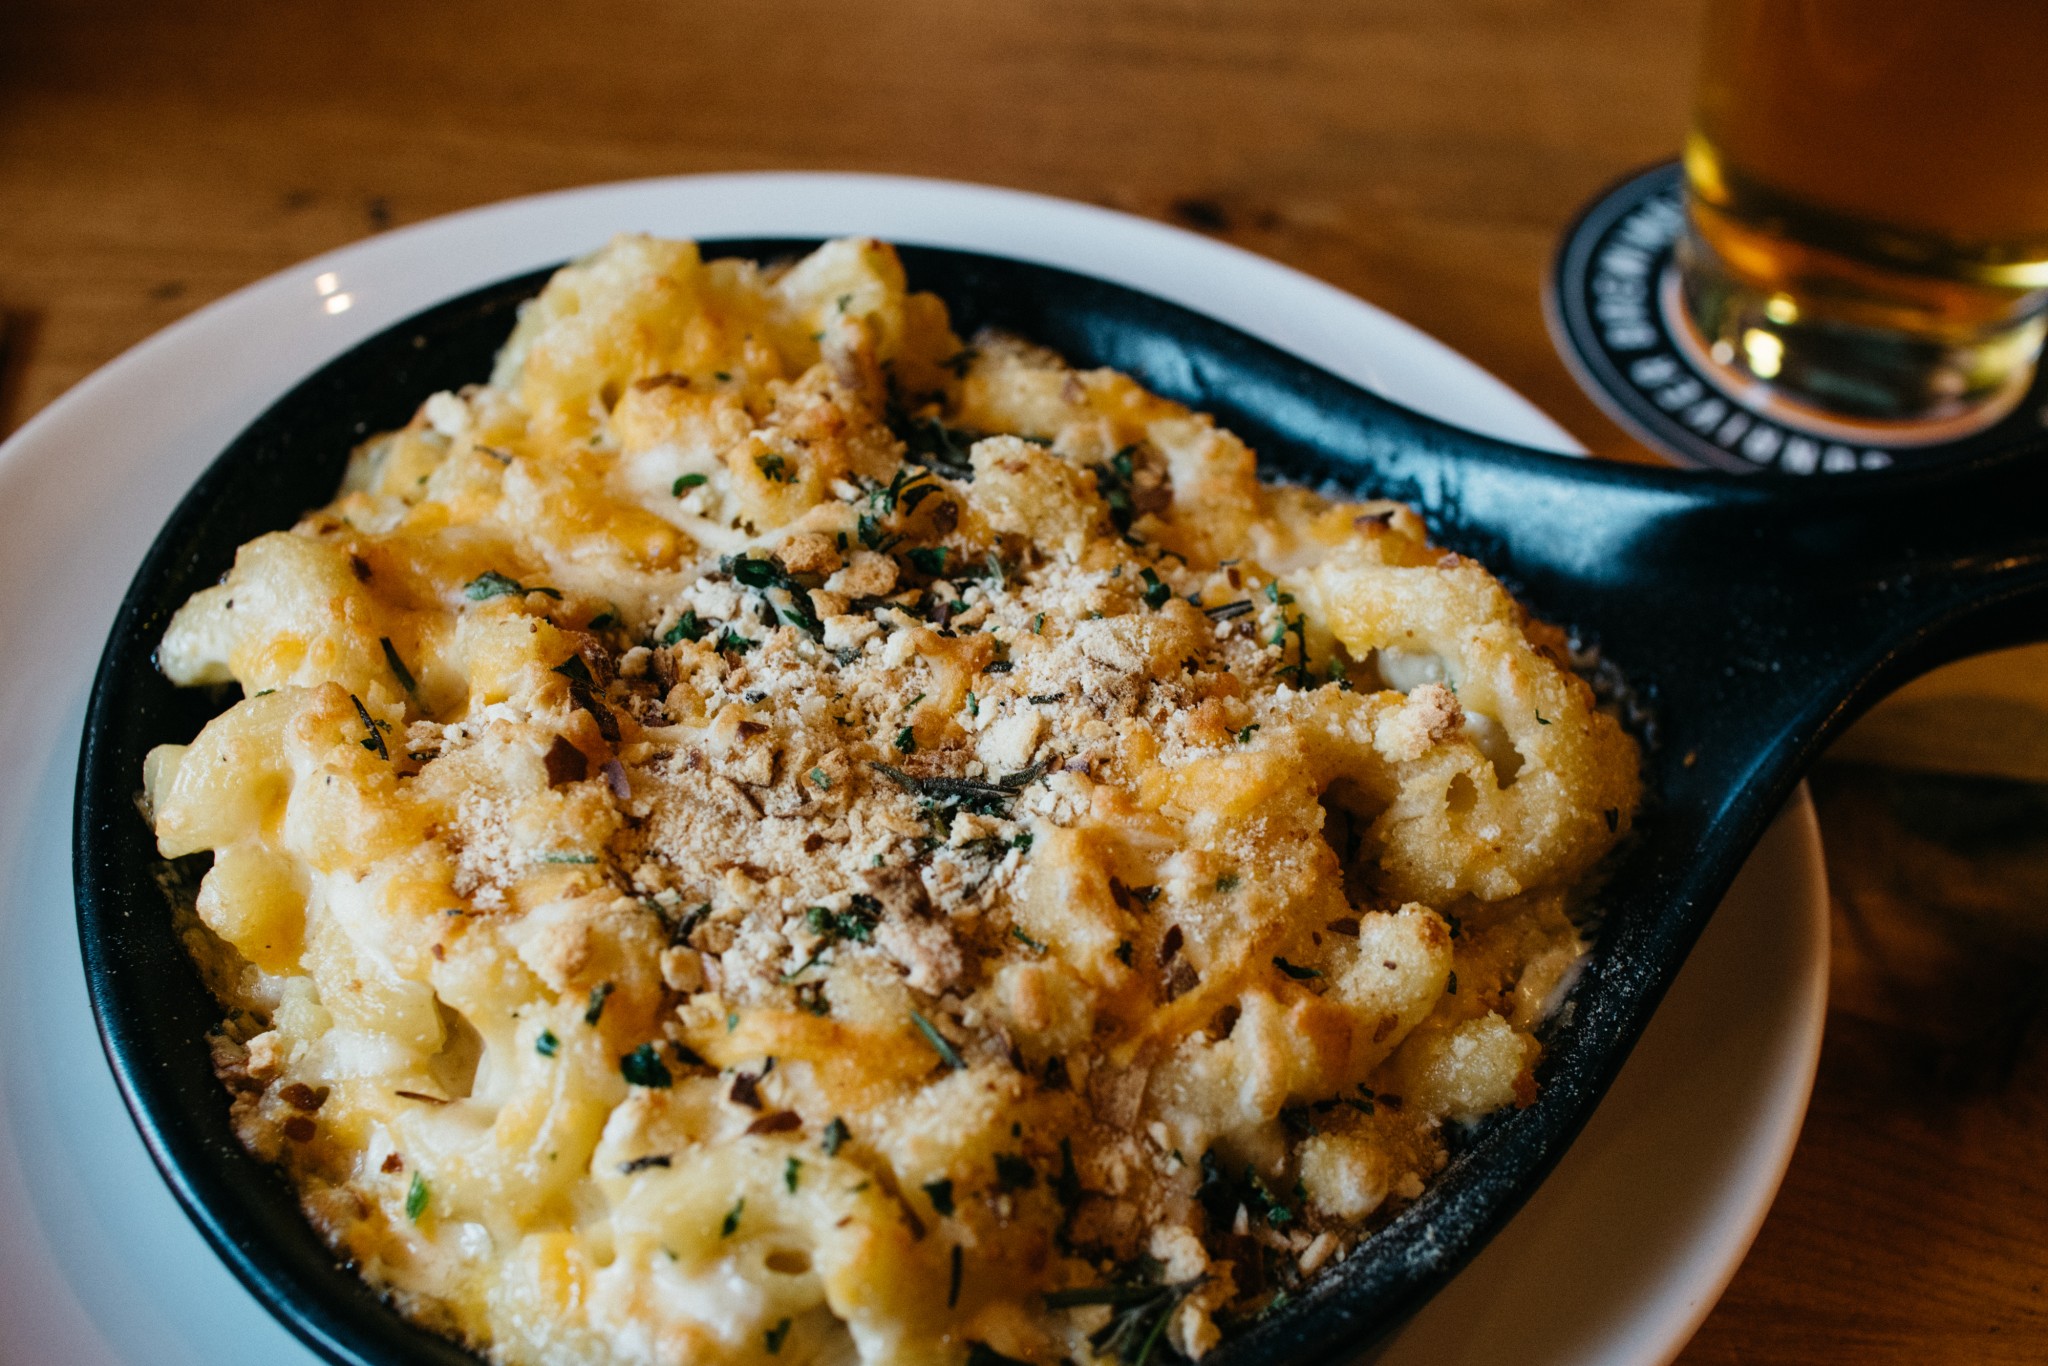 Baked Mac and Cheese at Sunriver Brewing Co.